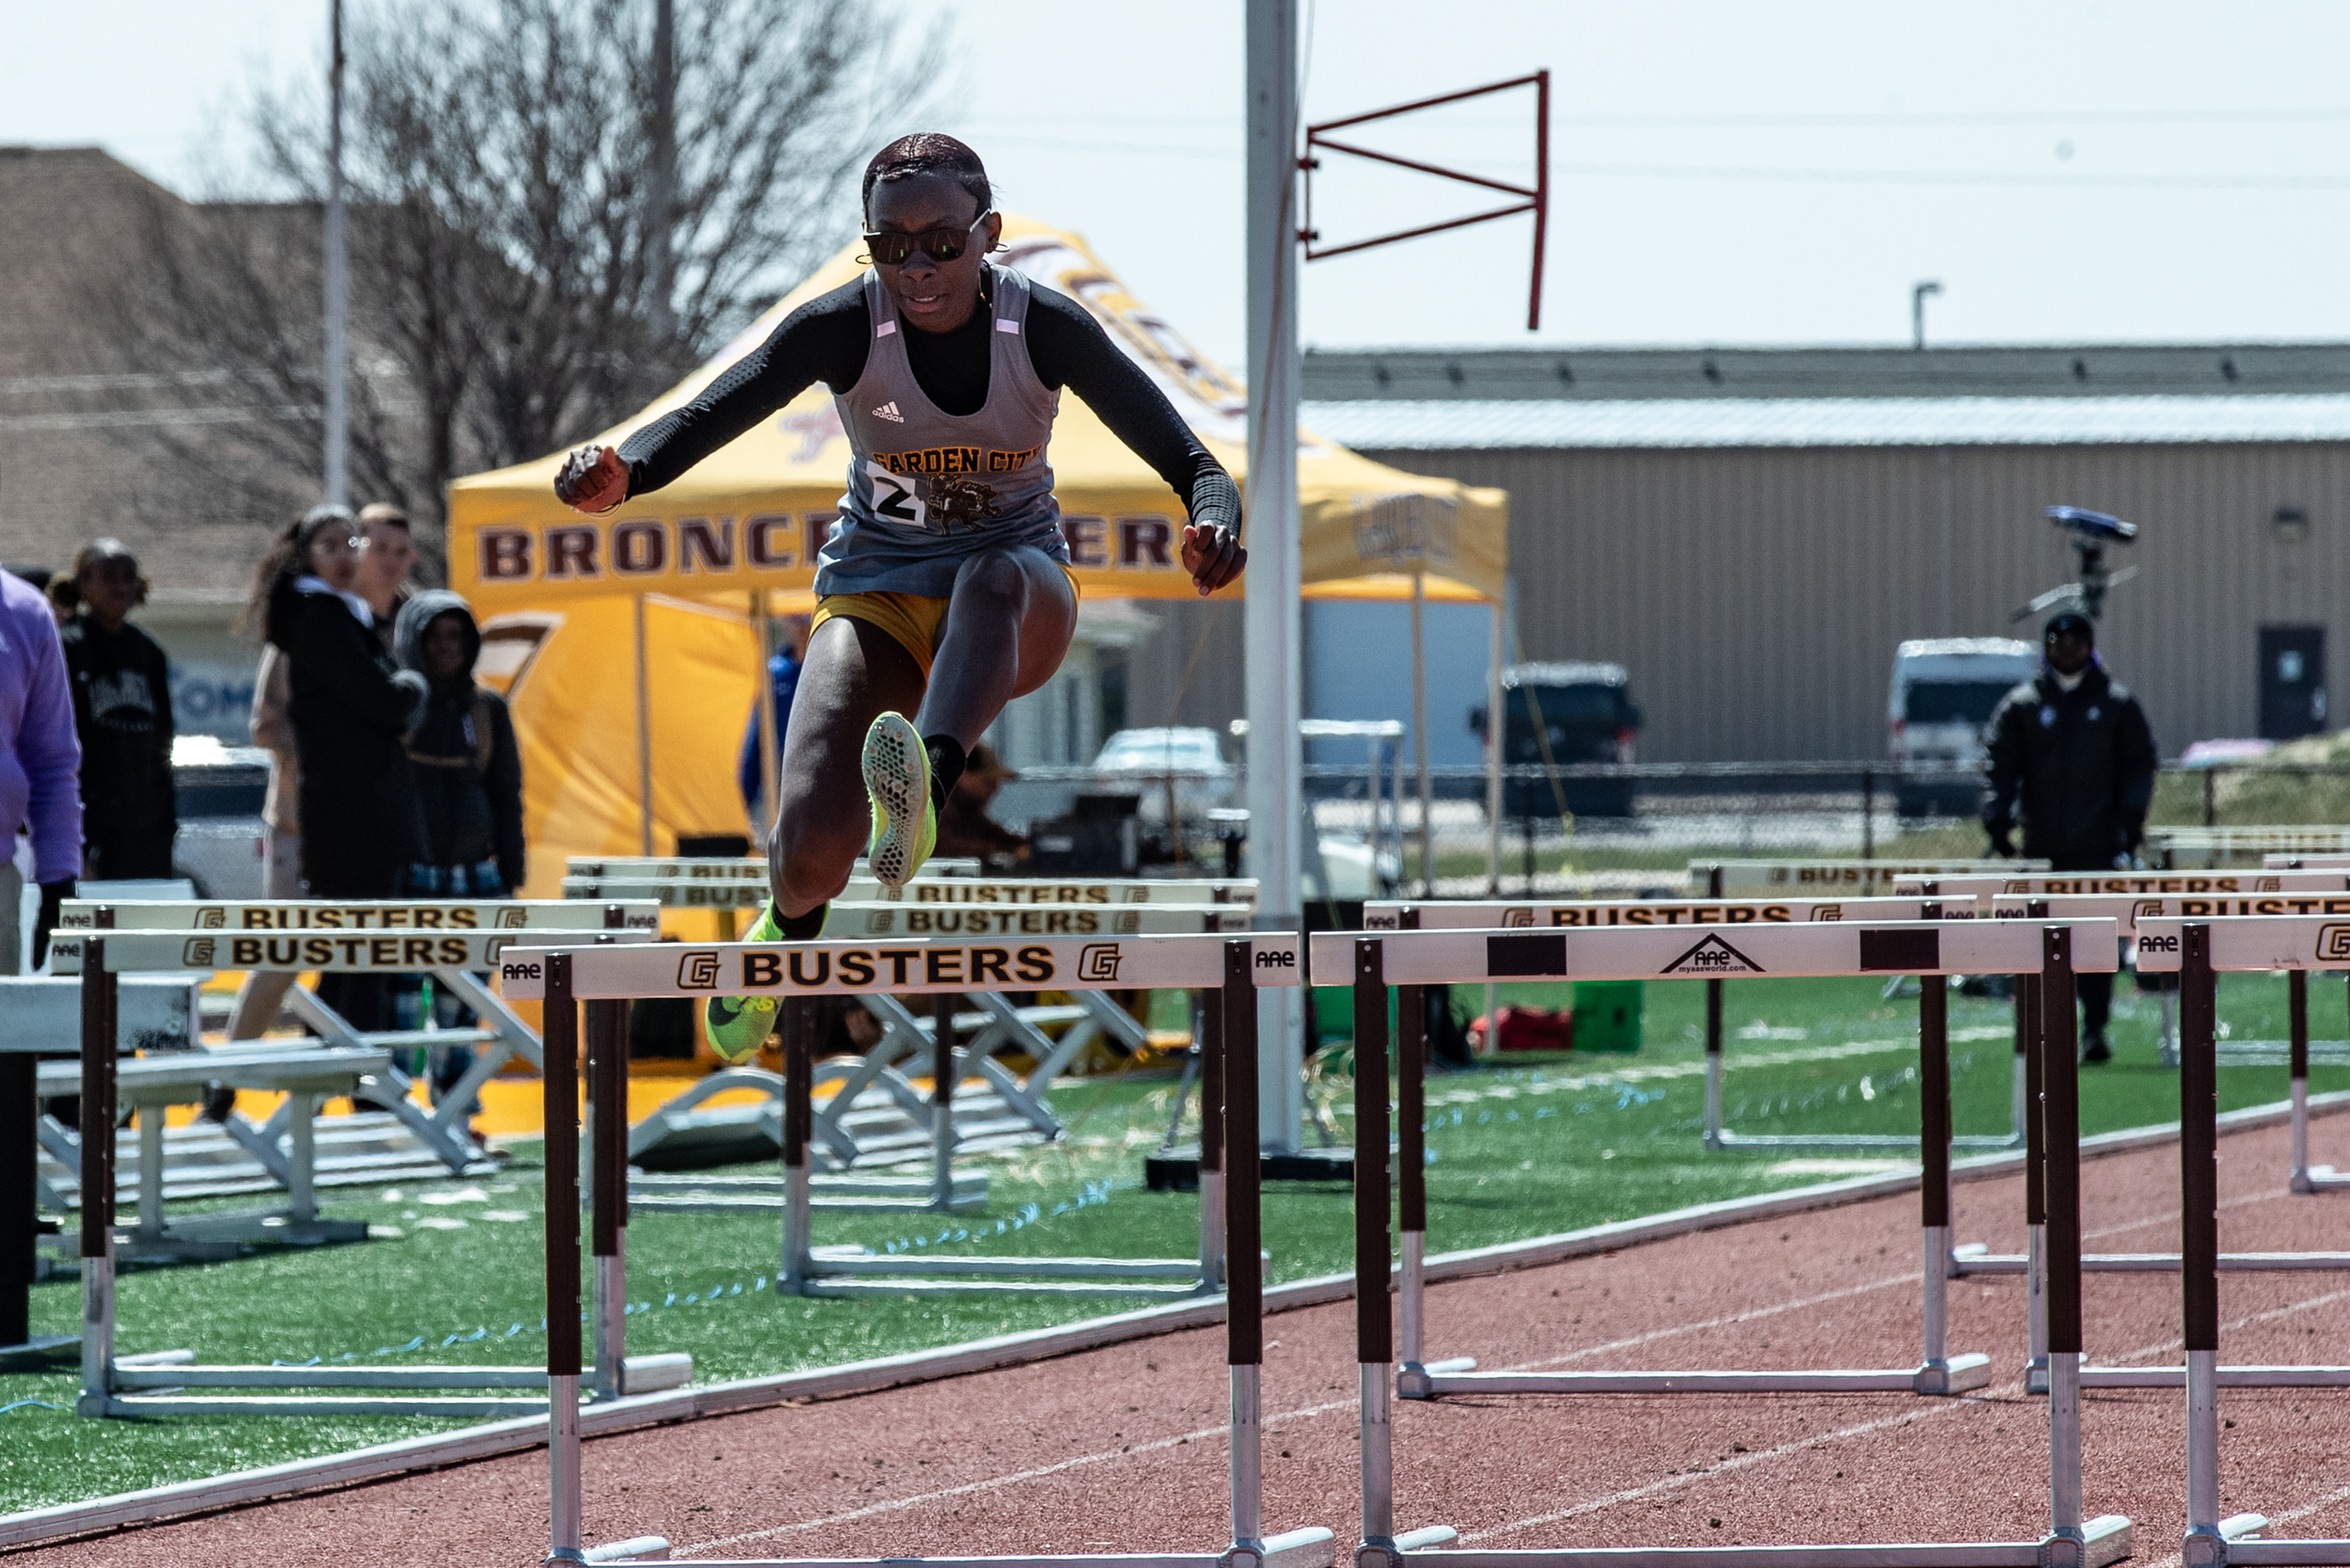 Garden City hosts second annual Broncbuster Invite